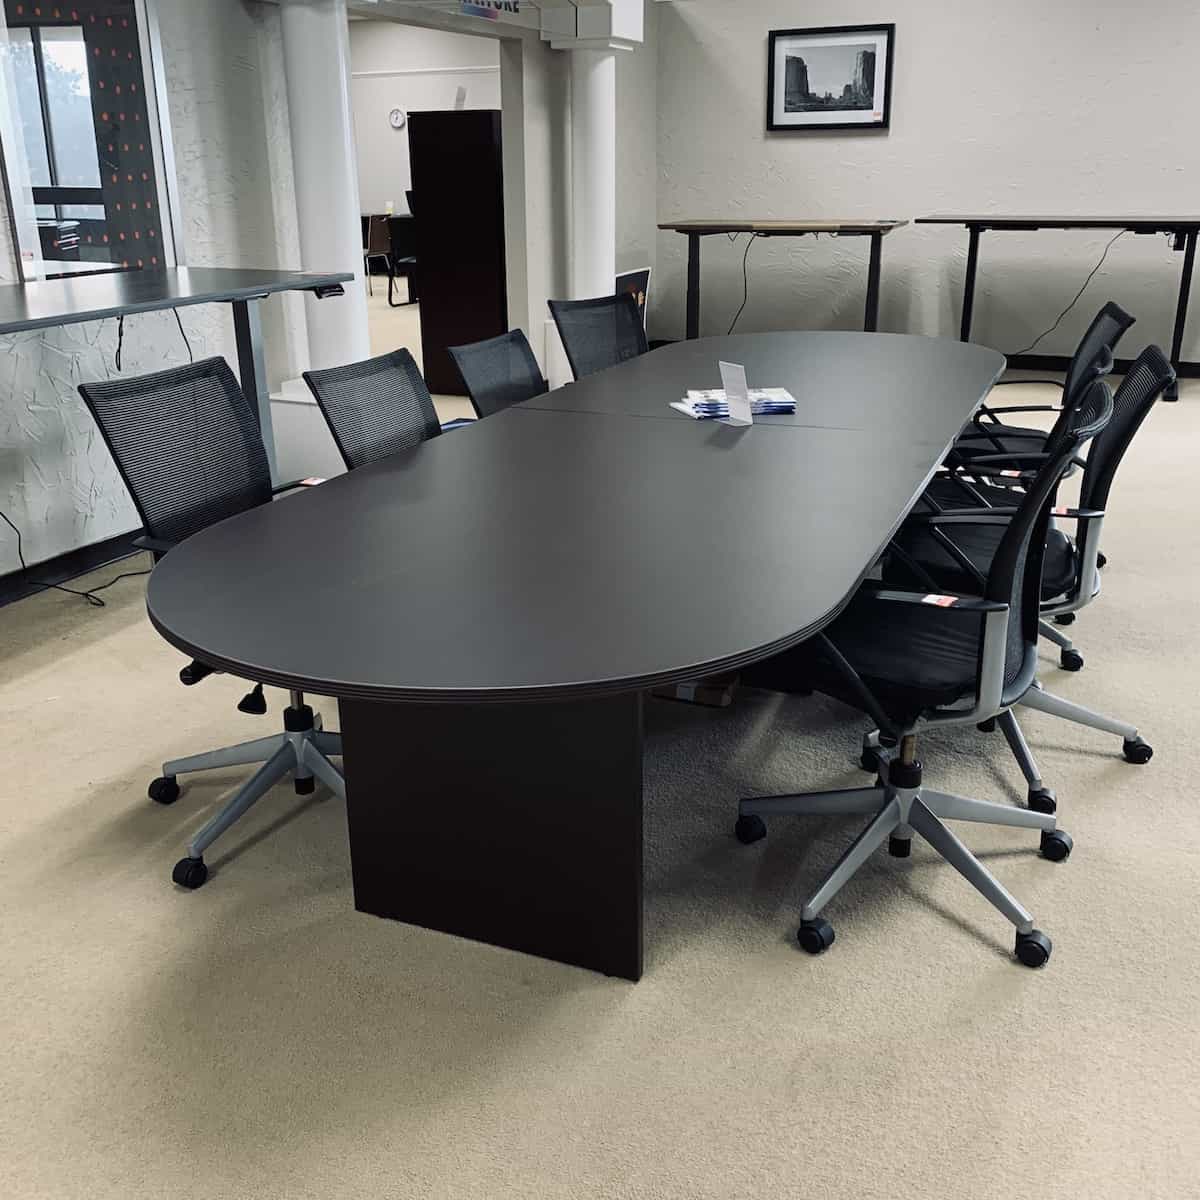 new-espresso-conference-table-racetrack